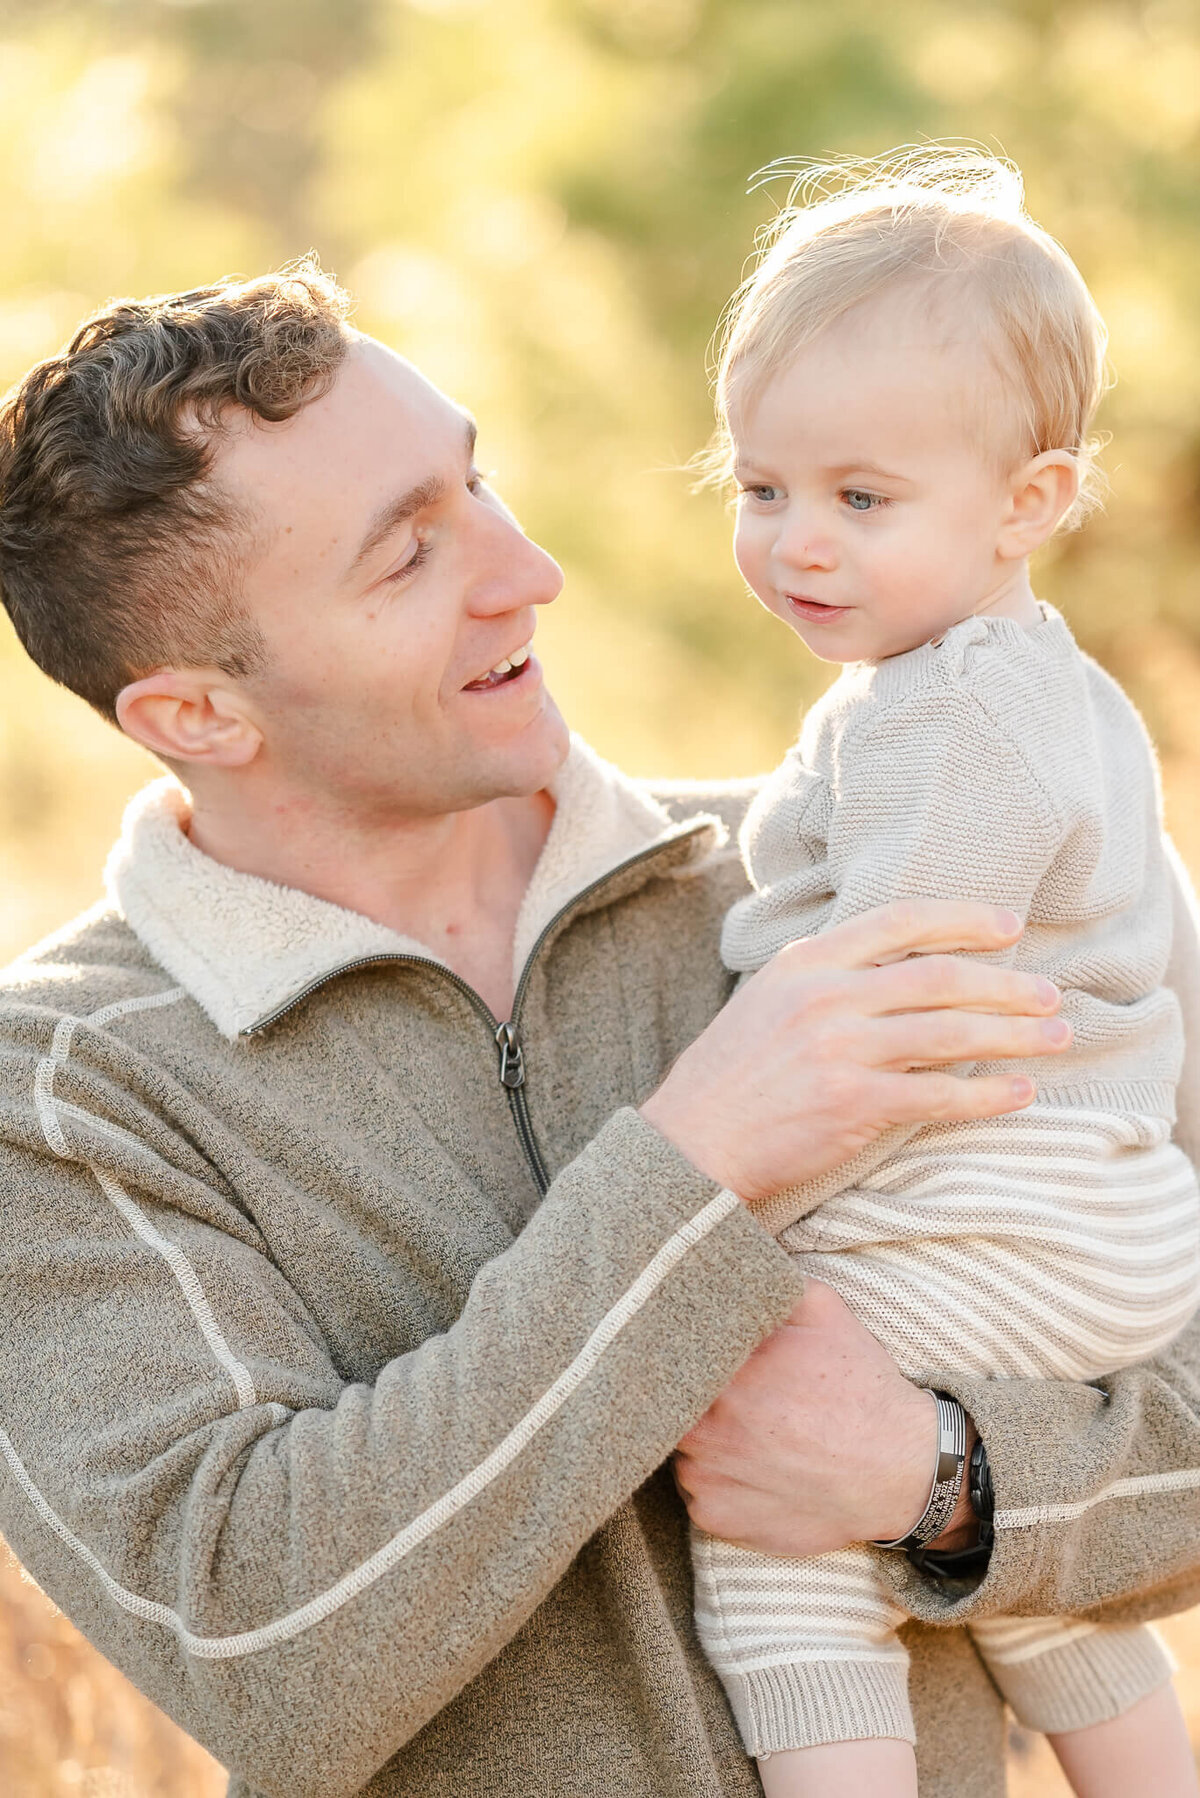 A man, wearing a neutral sweater, holds his toddler son, who is also wearing neutrals during a family photoshoot.